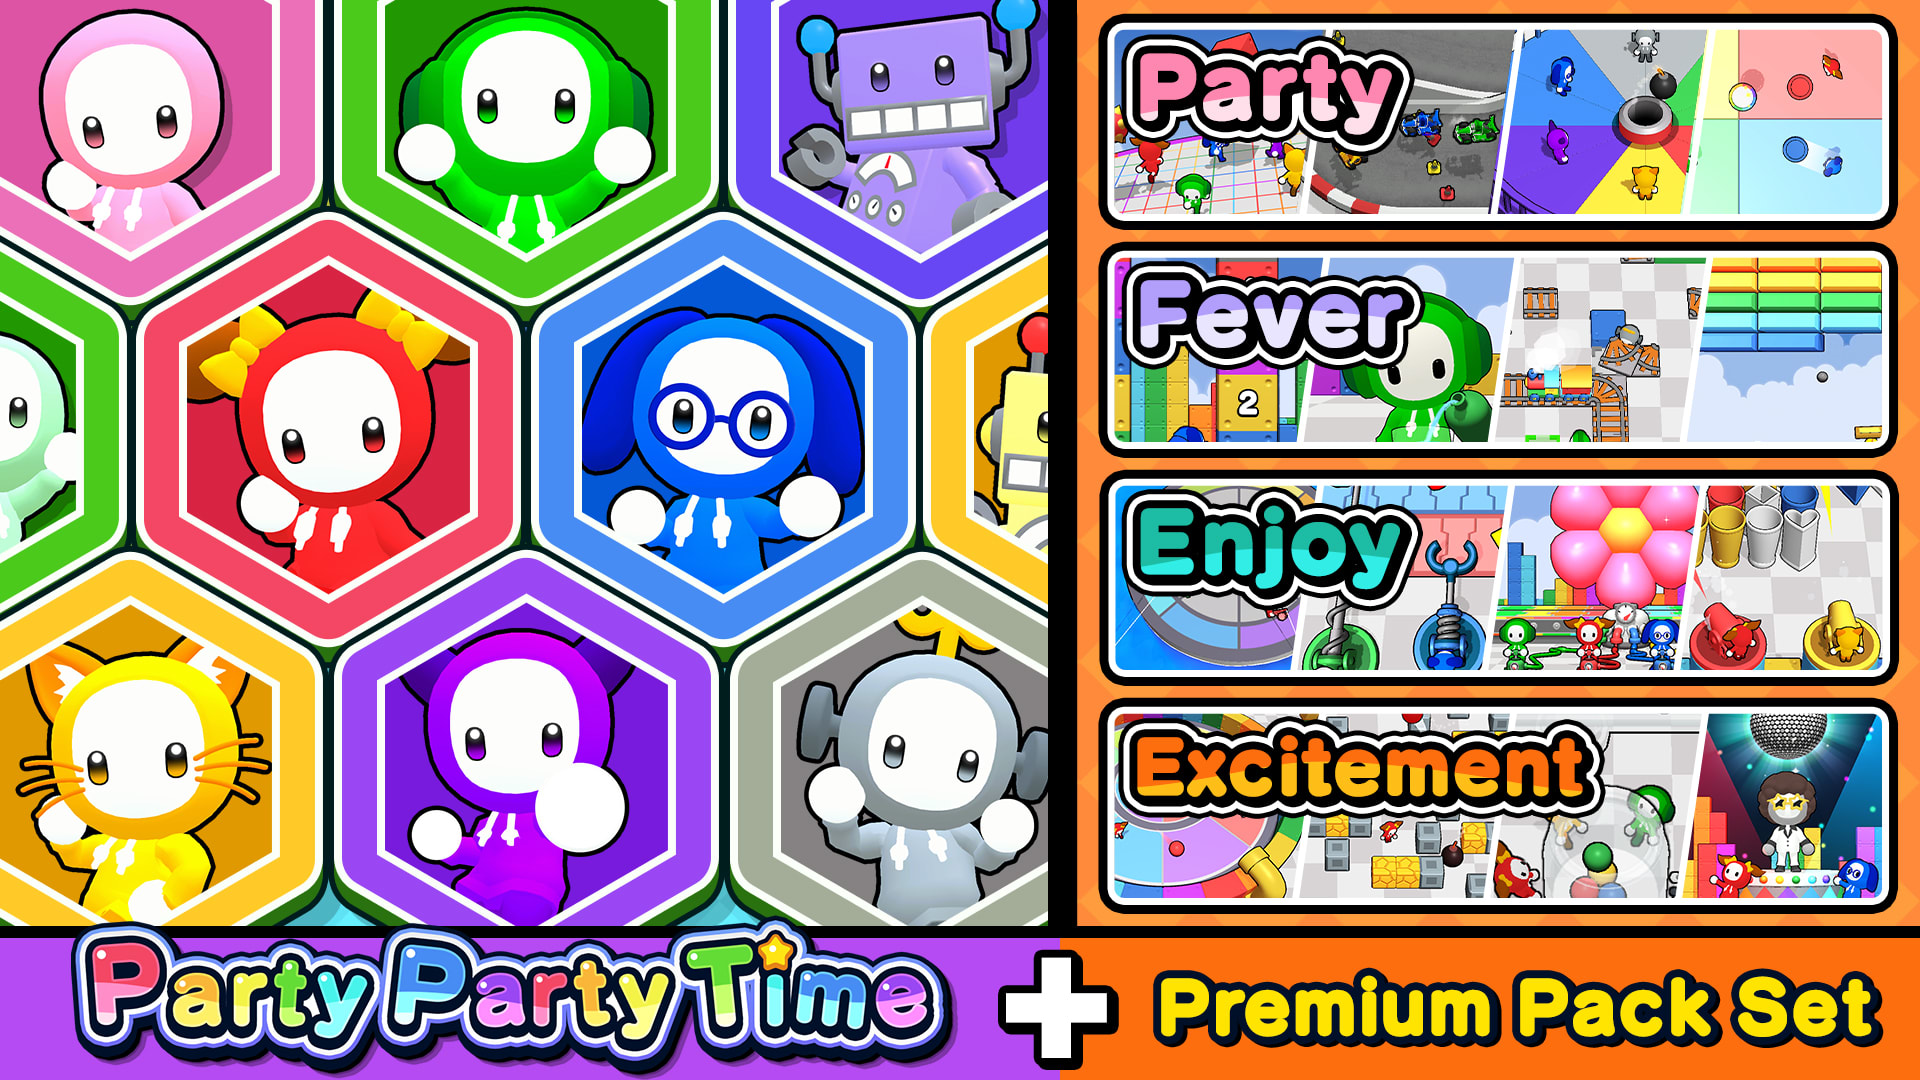 Party Party Time + Premium Pack Set